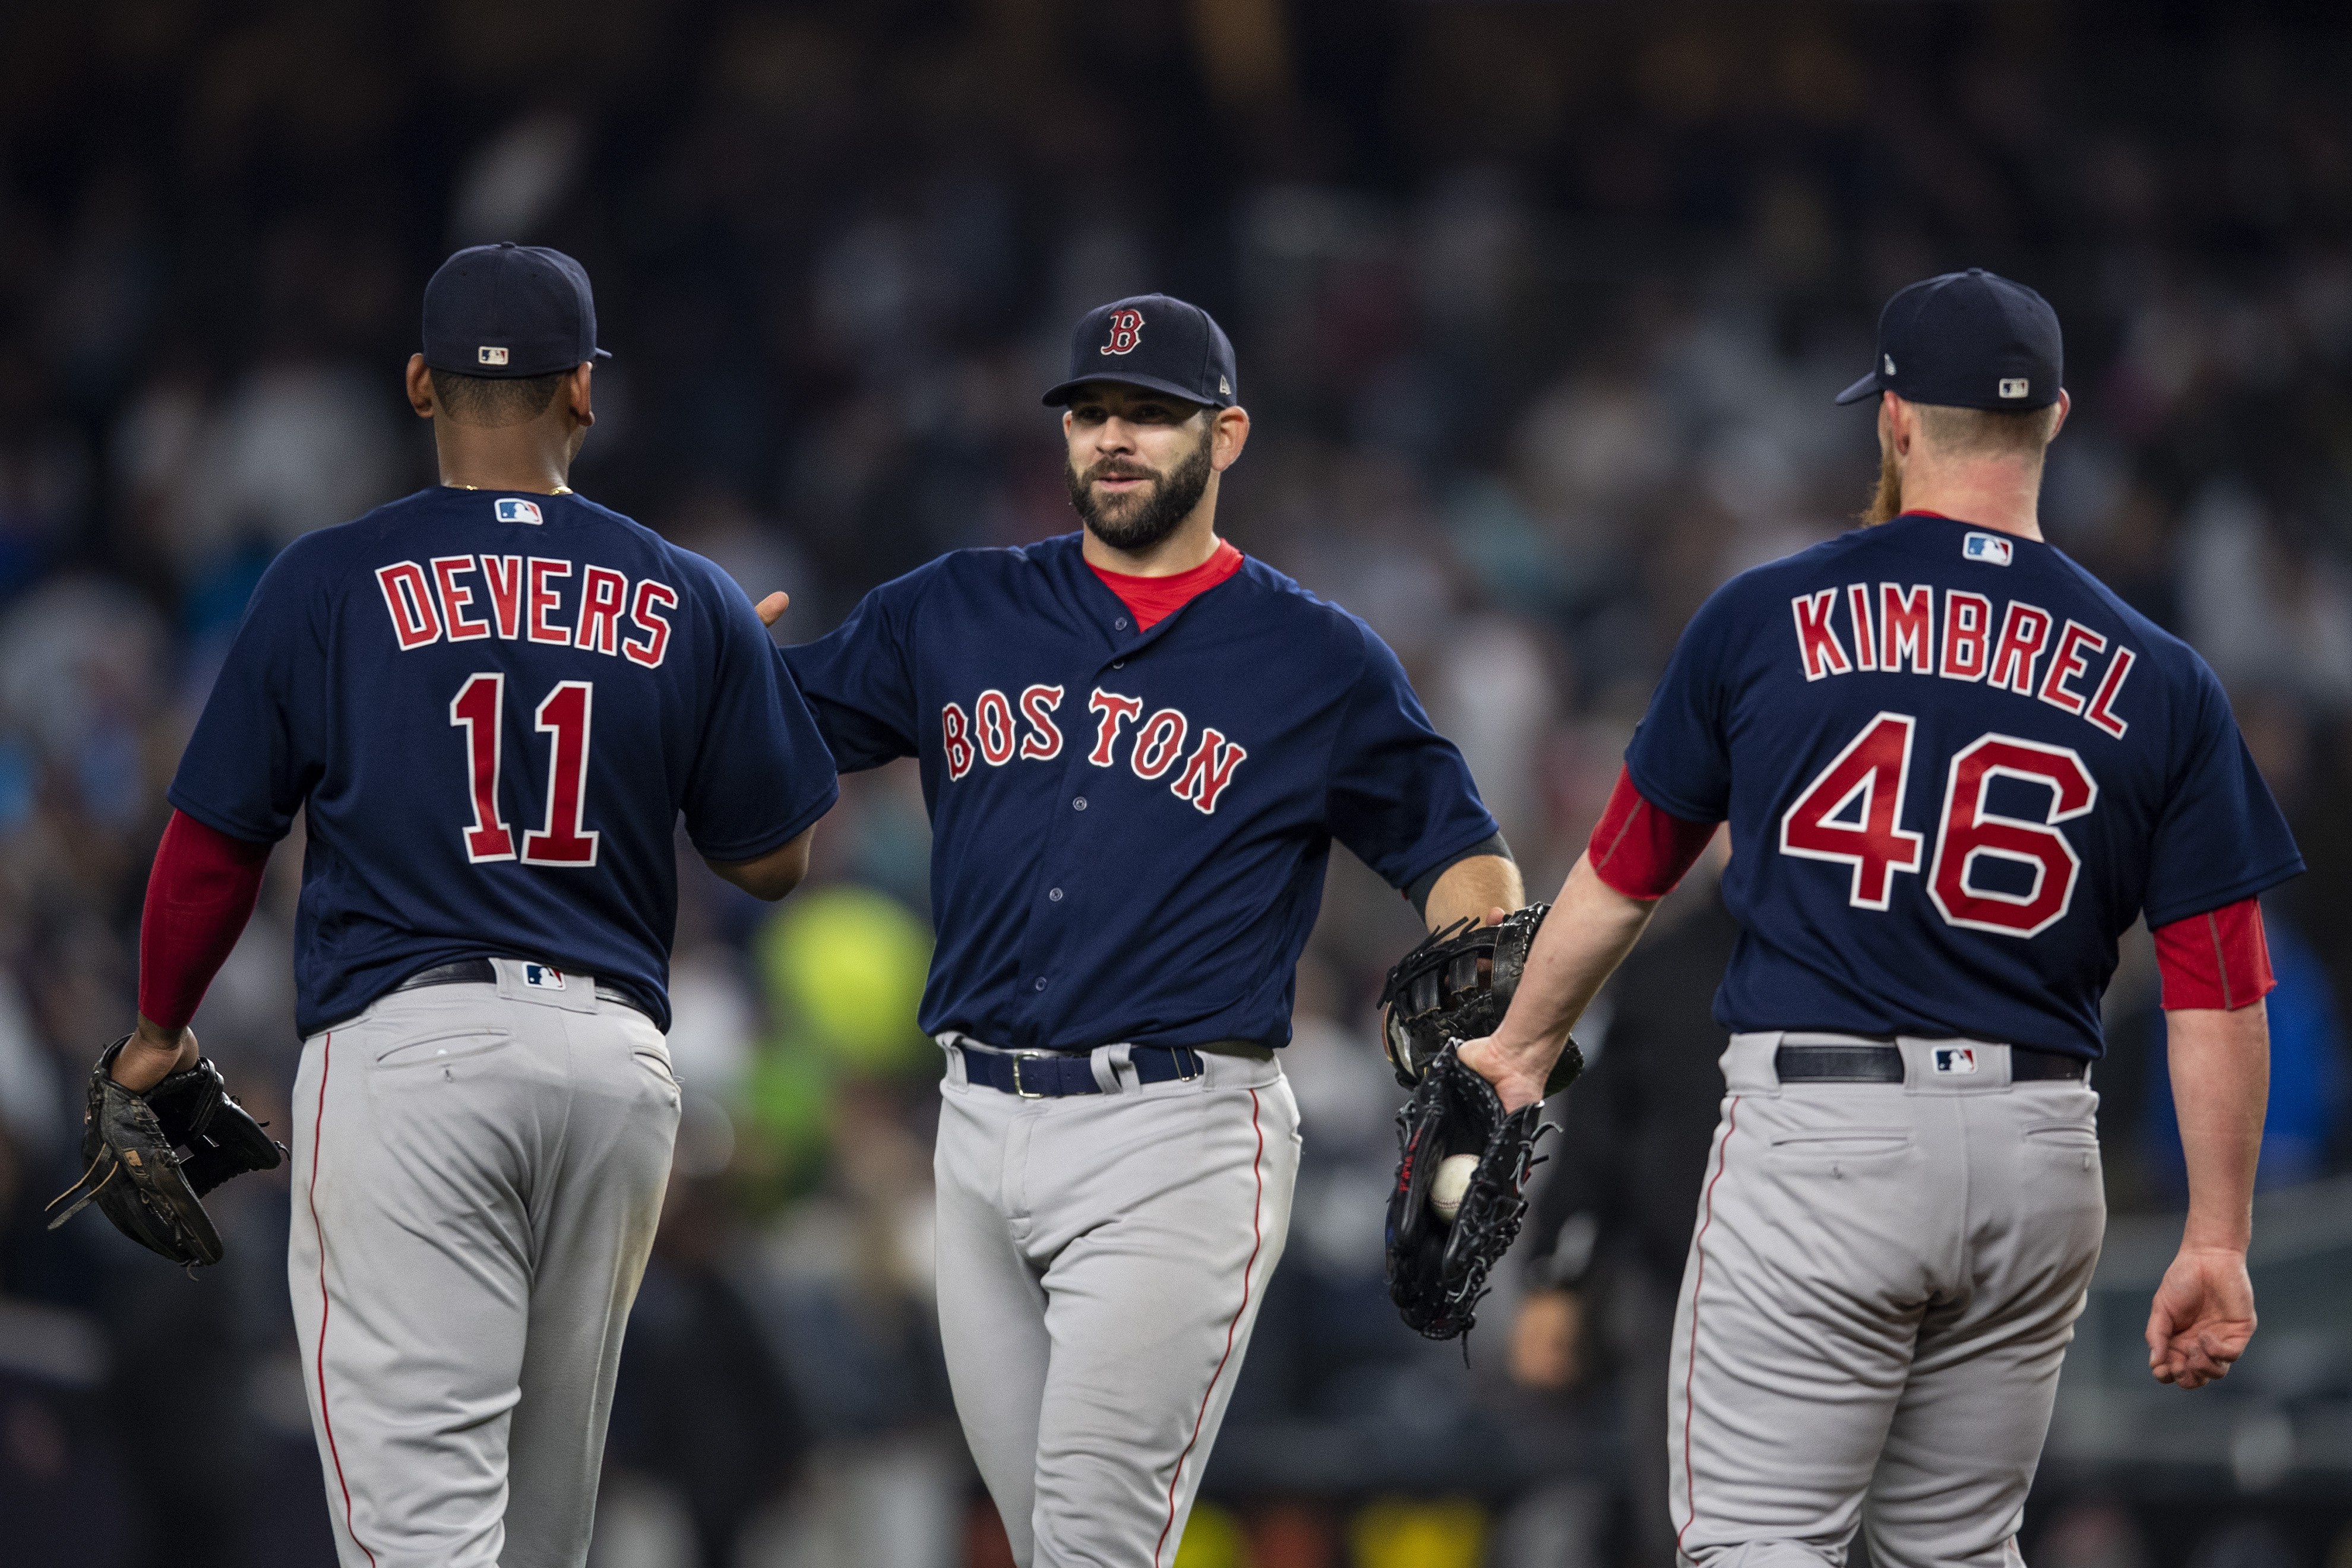 Mitch Moreland #18, Rafael Devers #11 and Craig Kimbrel #46 of the Boston Red Sox celebrate a victory  against the New York Yankees on May 10, 2018 at Yankee Stadium in the Bronx borough of New York City. (Photo by Billie Weiss/Boston Red Sox/Getty Images)